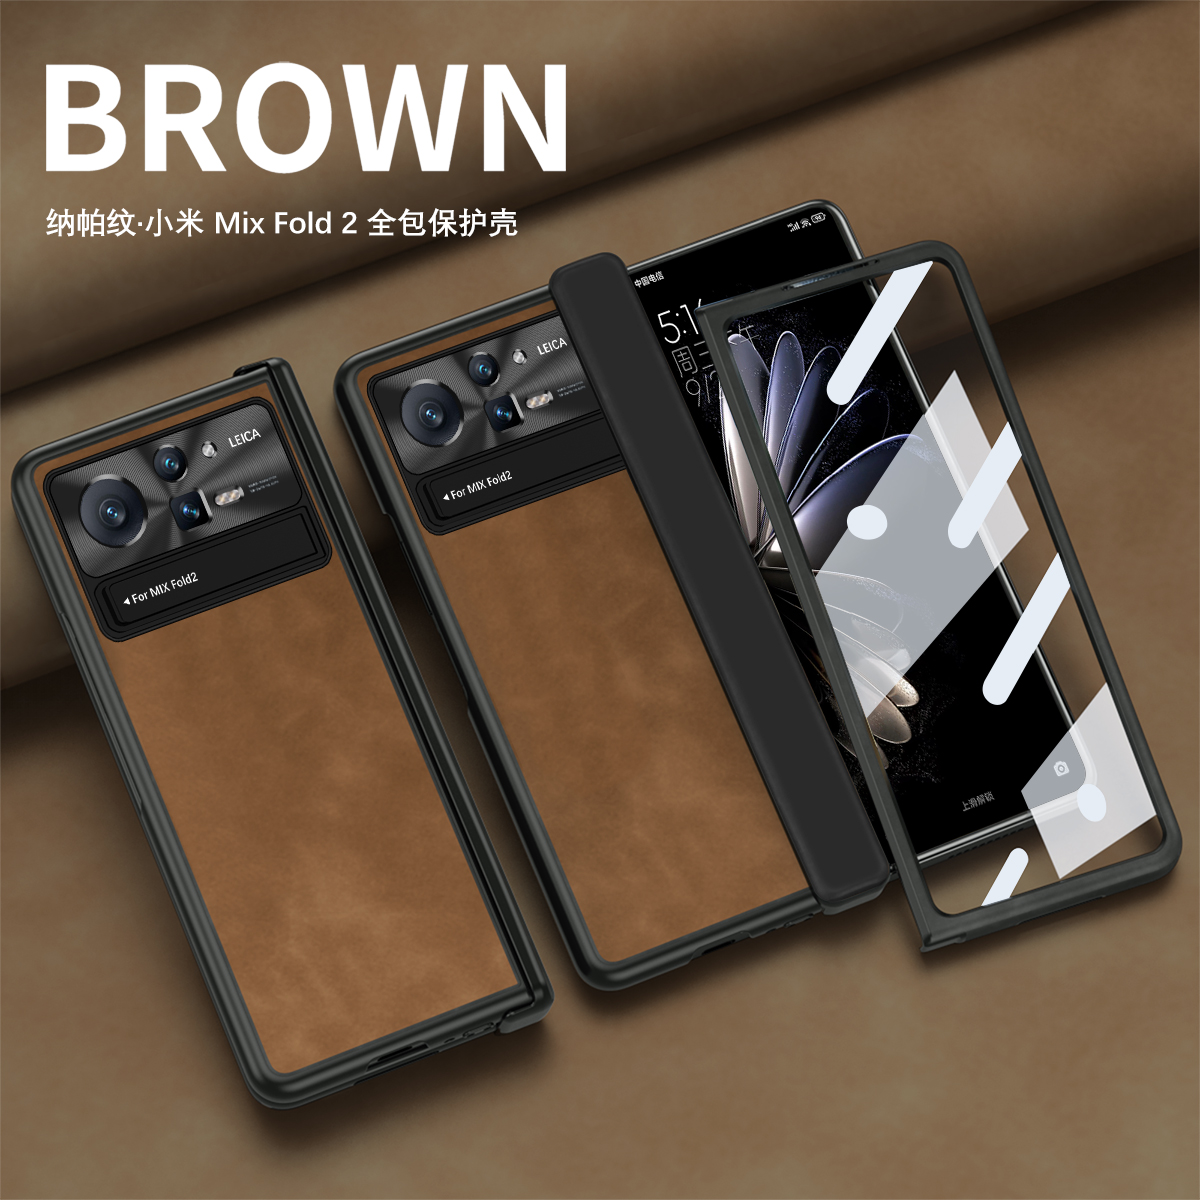 Magnetic Leather Stand Cases For Xiaomi Mix Fold 2 Case Armor Folding Lens Hinge Protective Film Cover